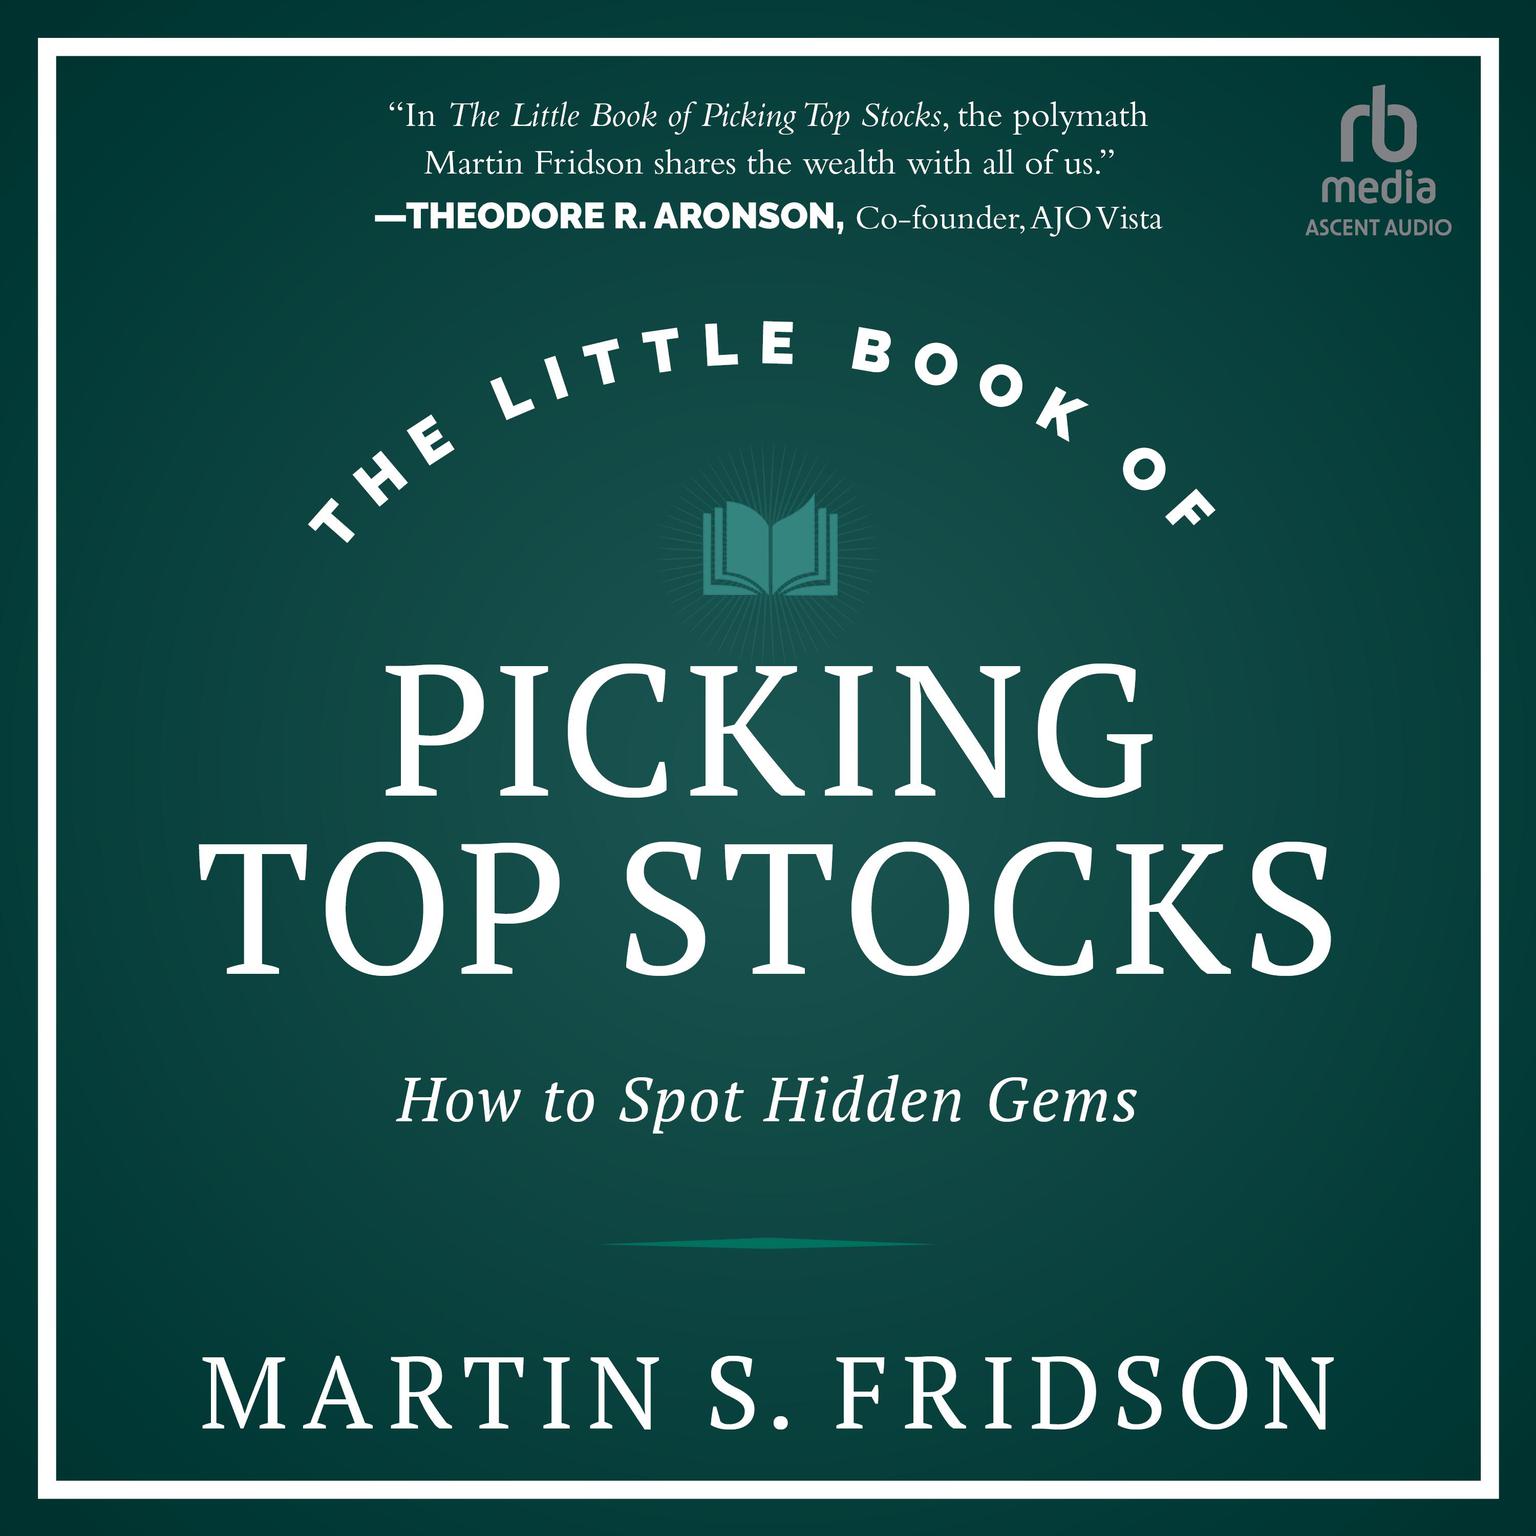 The Little Book of Picking Top Stocks: How to Spot Hidden Gems Audiobook, by Martin S. Fridson